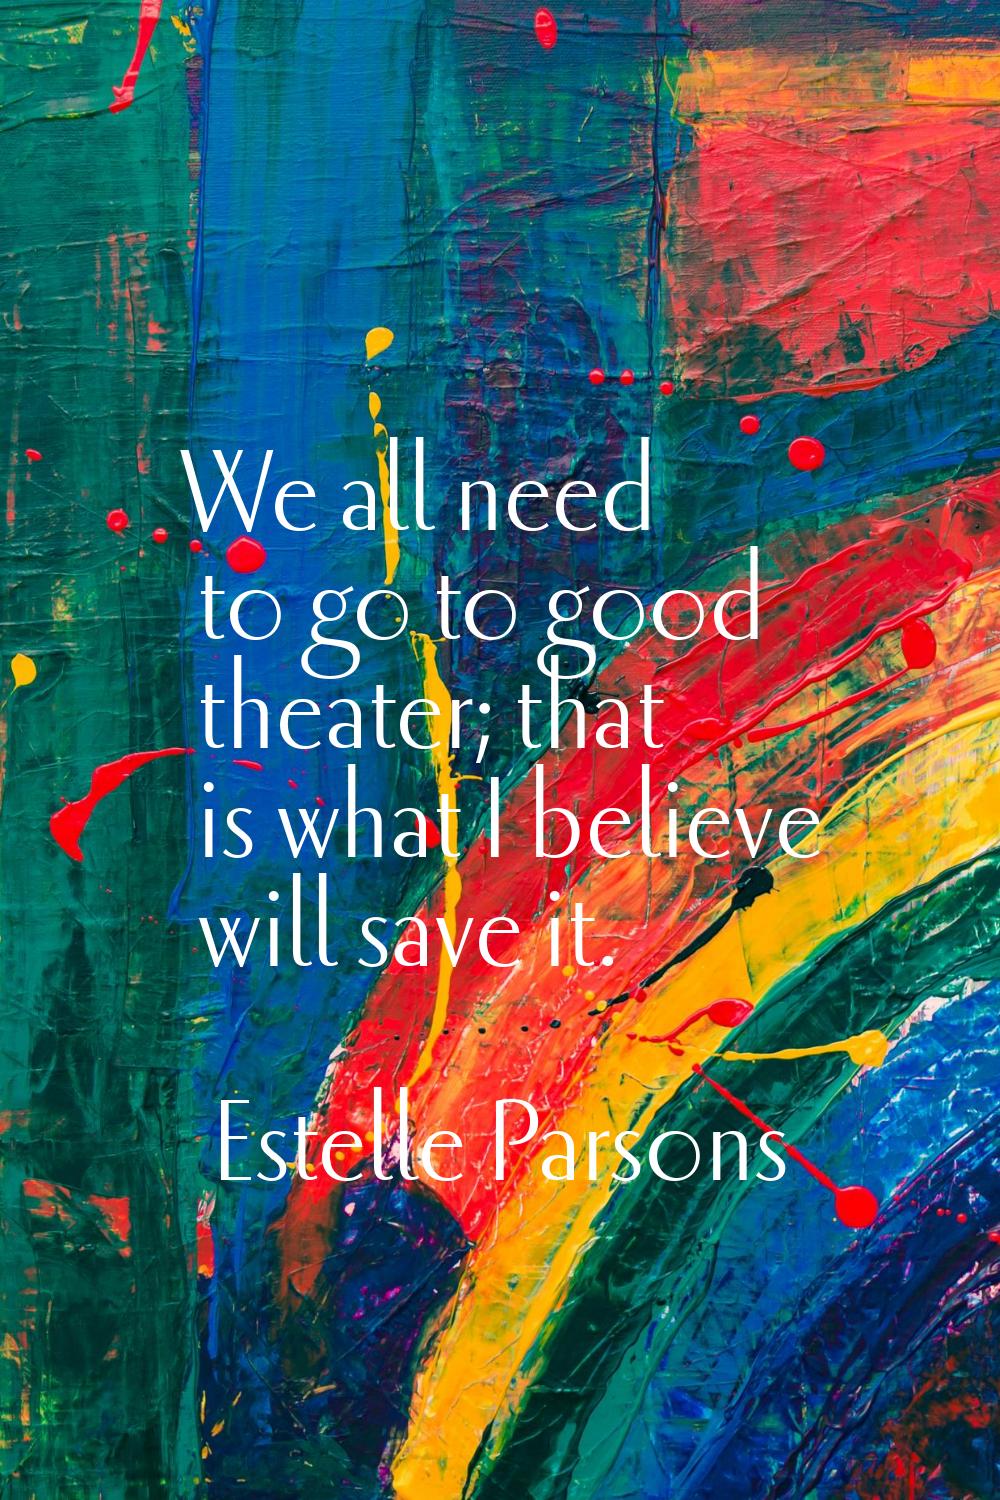 We all need to go to good theater; that is what I believe will save it.